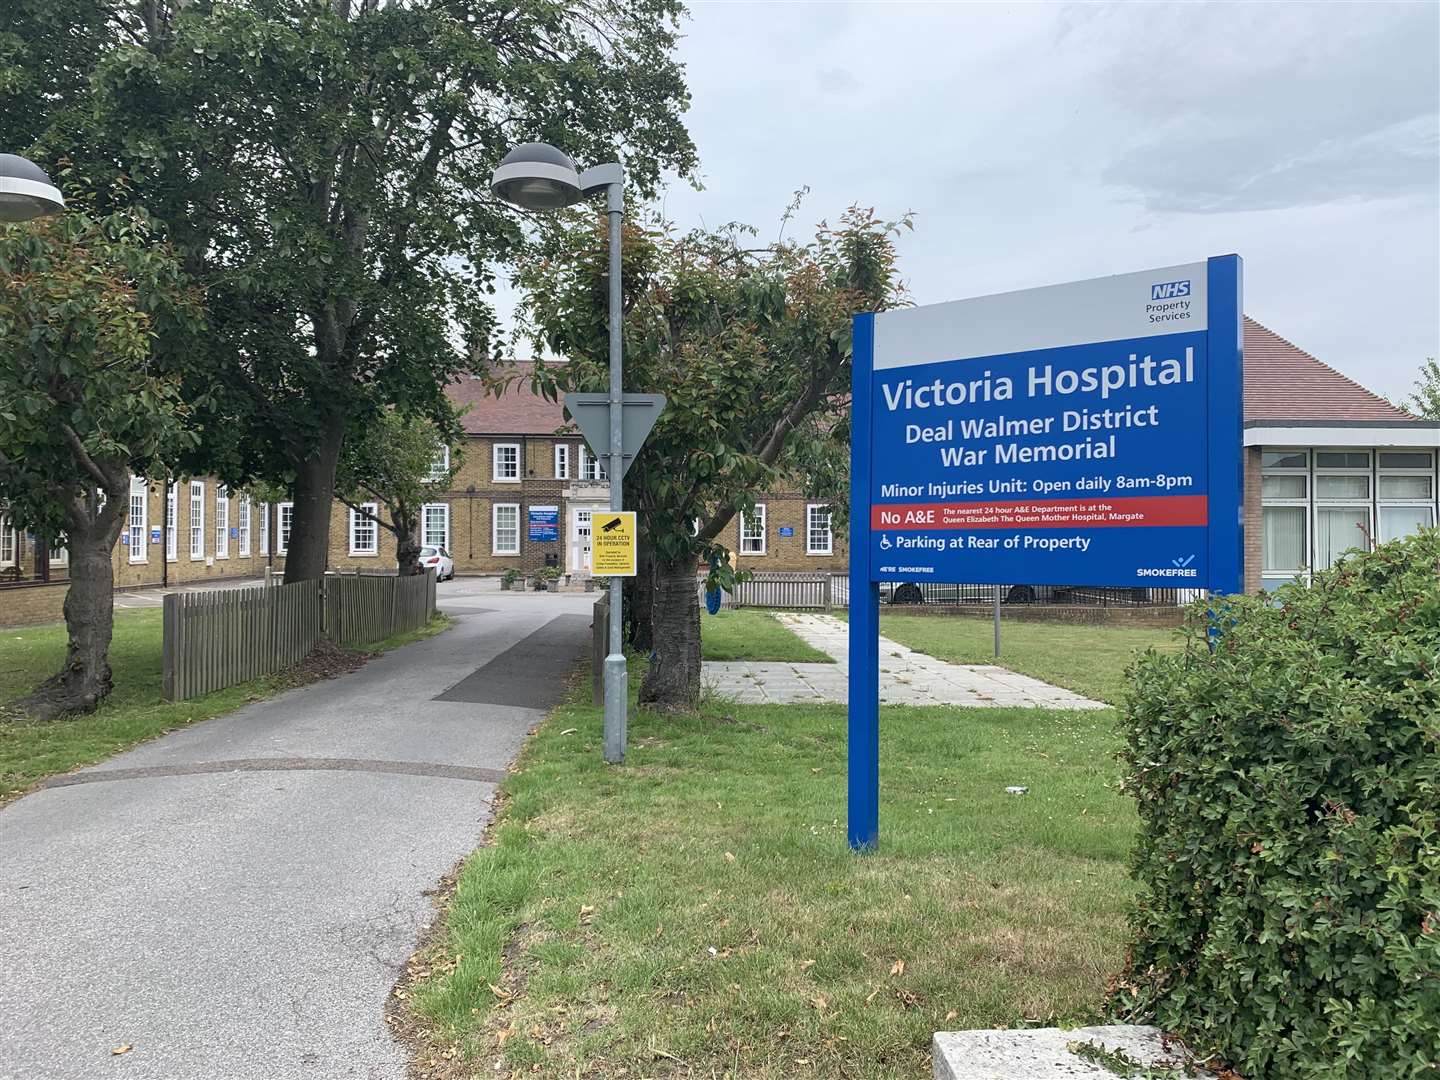 A rally has been organised after blood tests were axed at Deal hospital